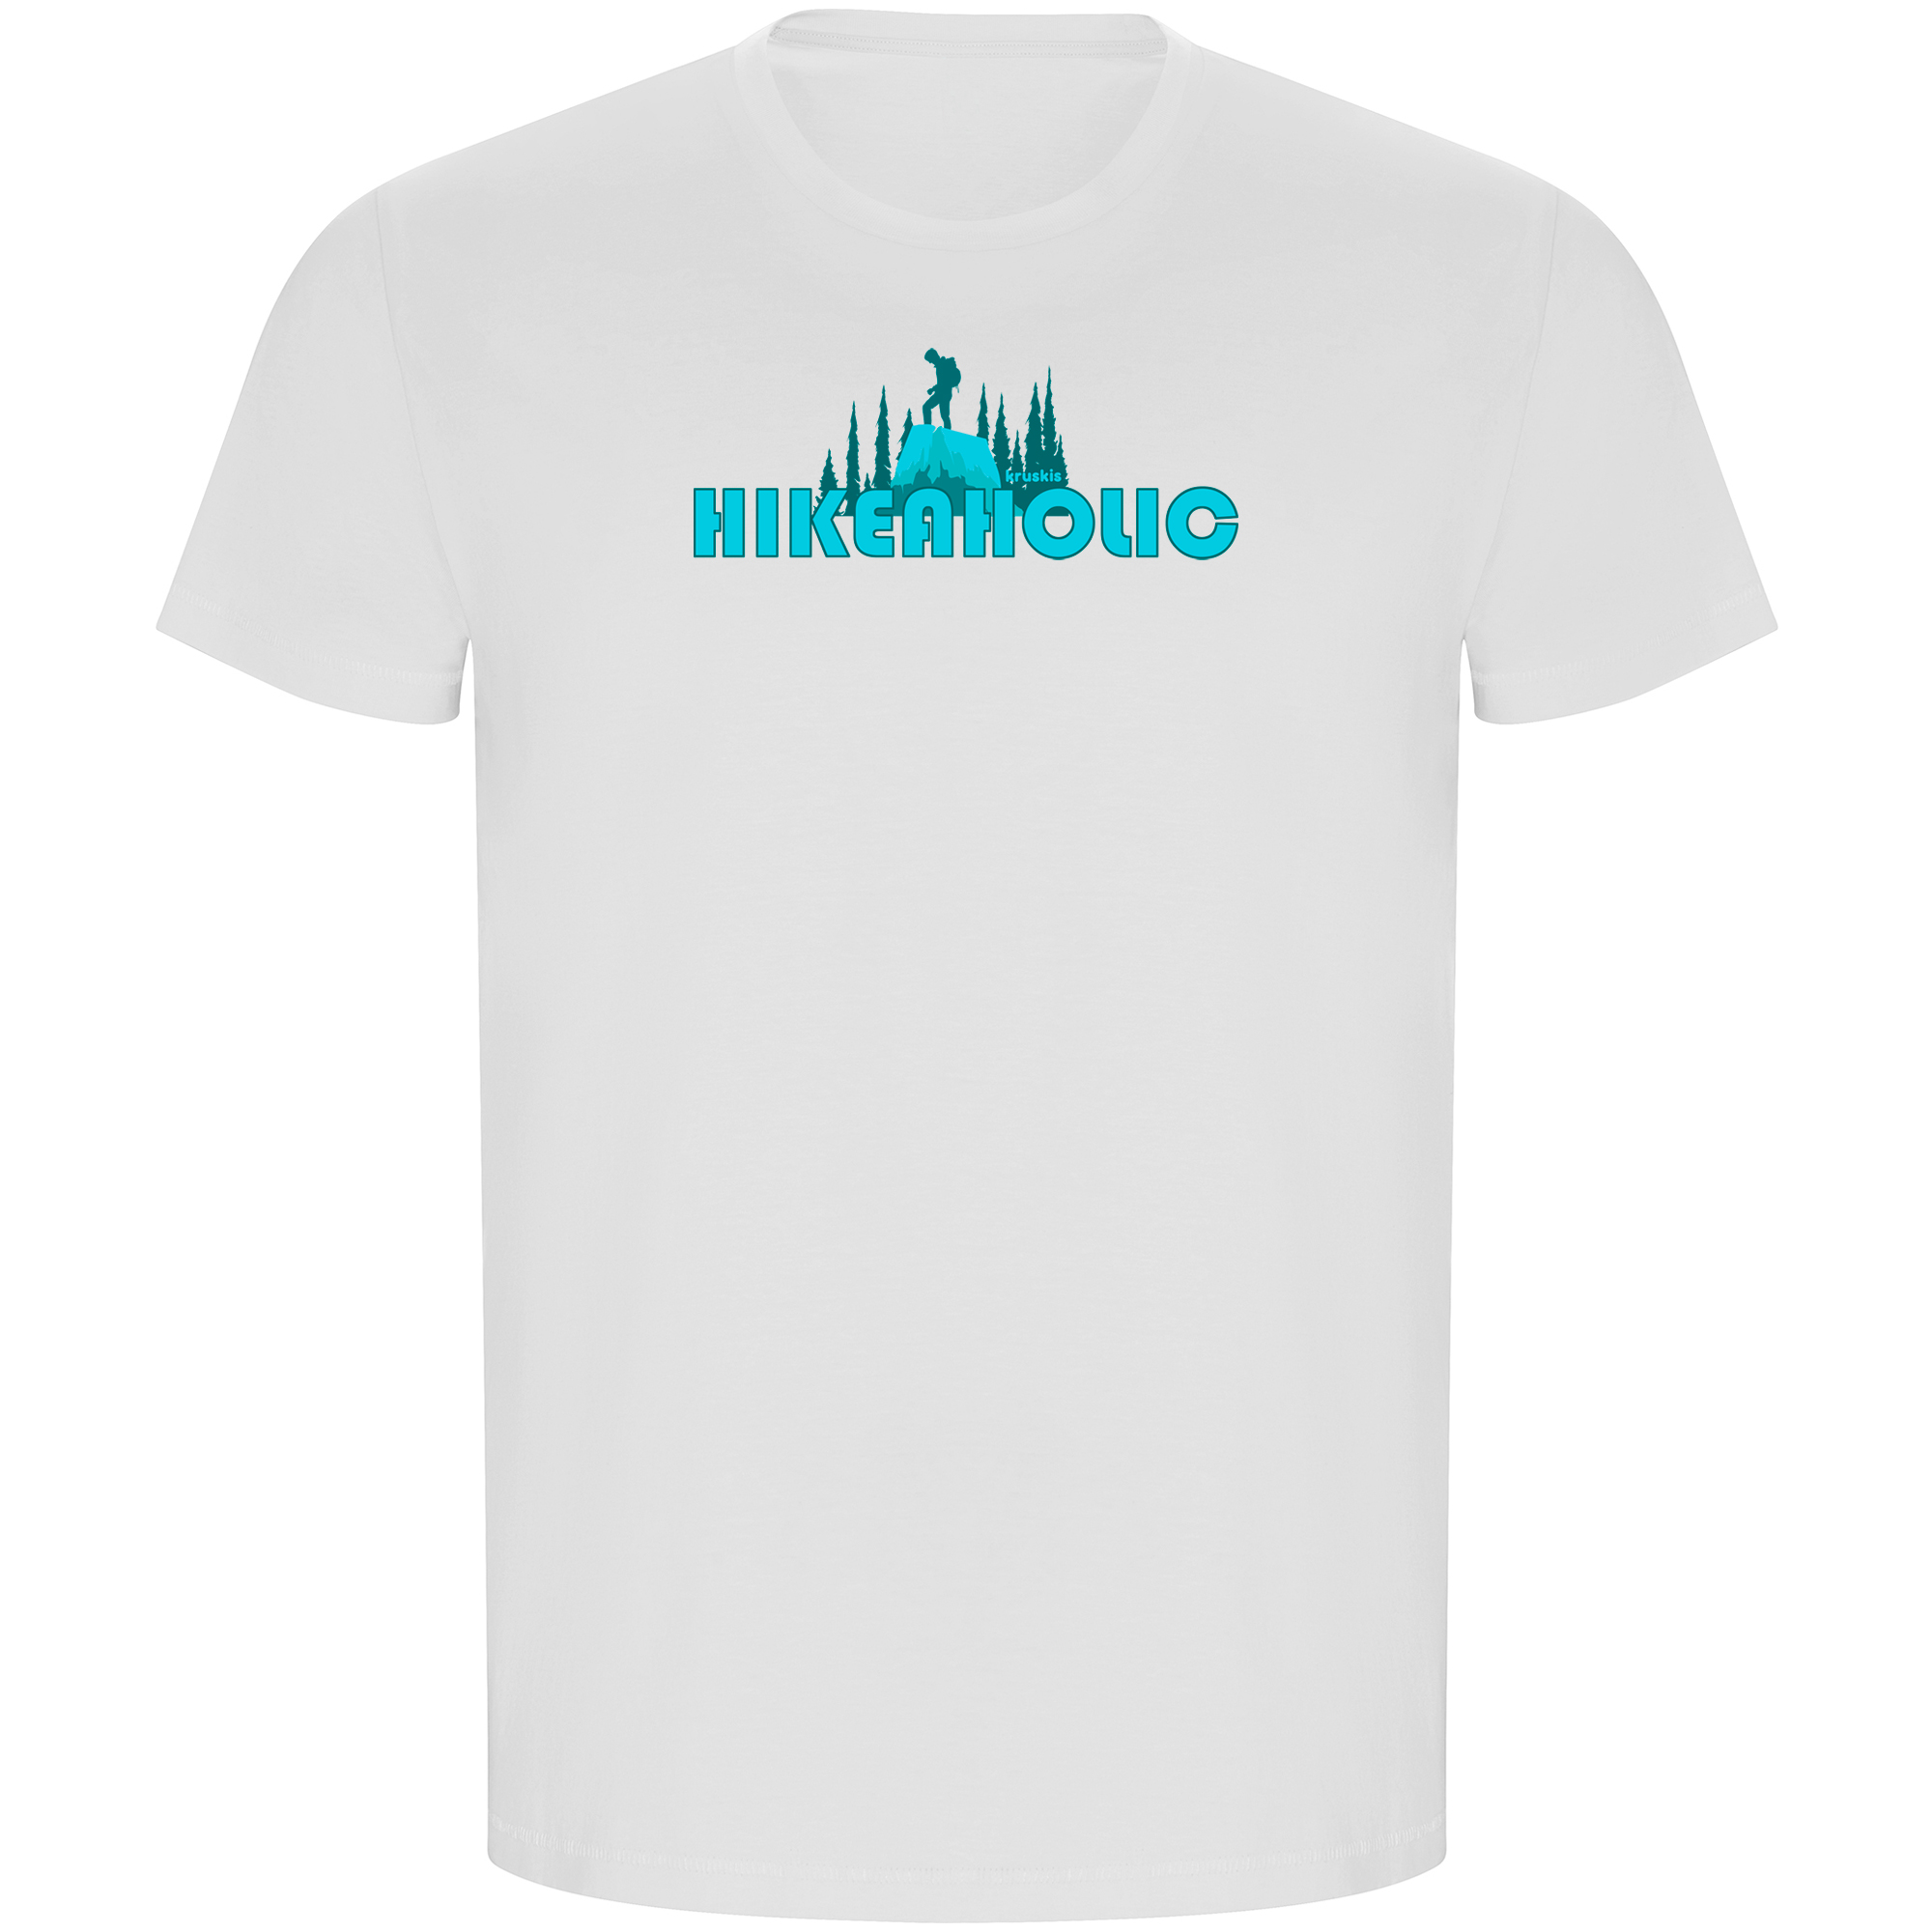 T Shirt ECO Mountaineering Hikeaholic Short Sleeves Man